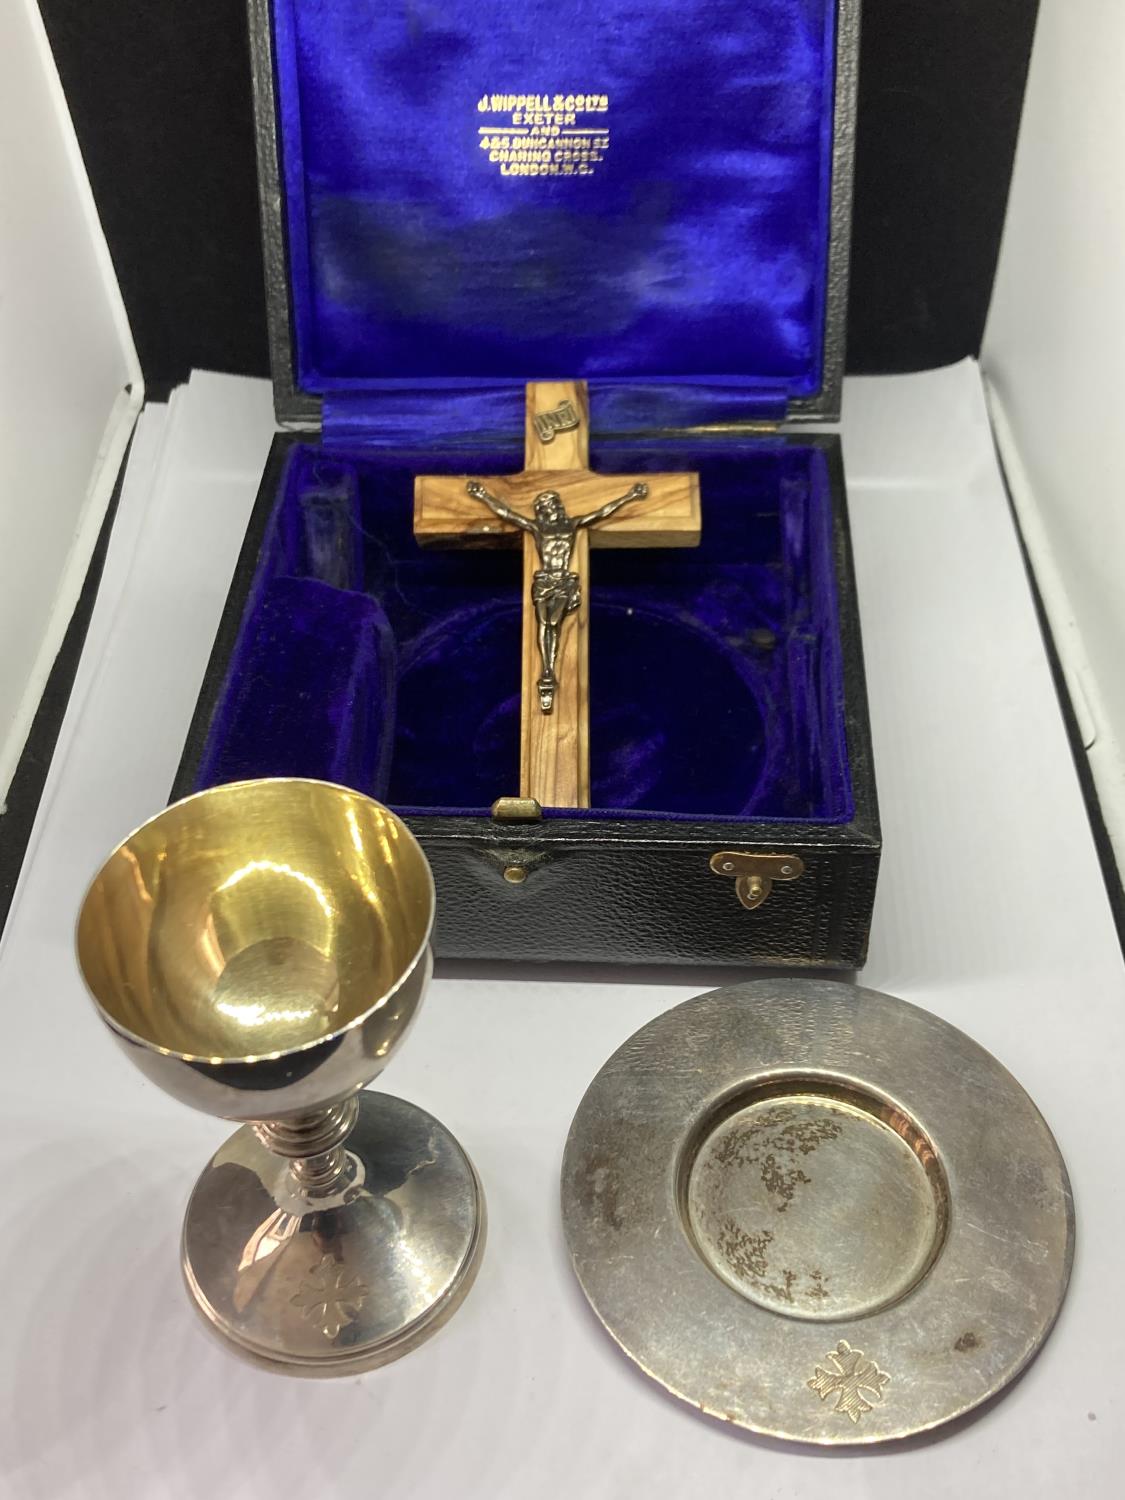 A HALLMARKED LONDON COMMUNION SET COMPRISING OF A GOBLET AND TRAY AND A WOODEN CRUCUFIX IN A